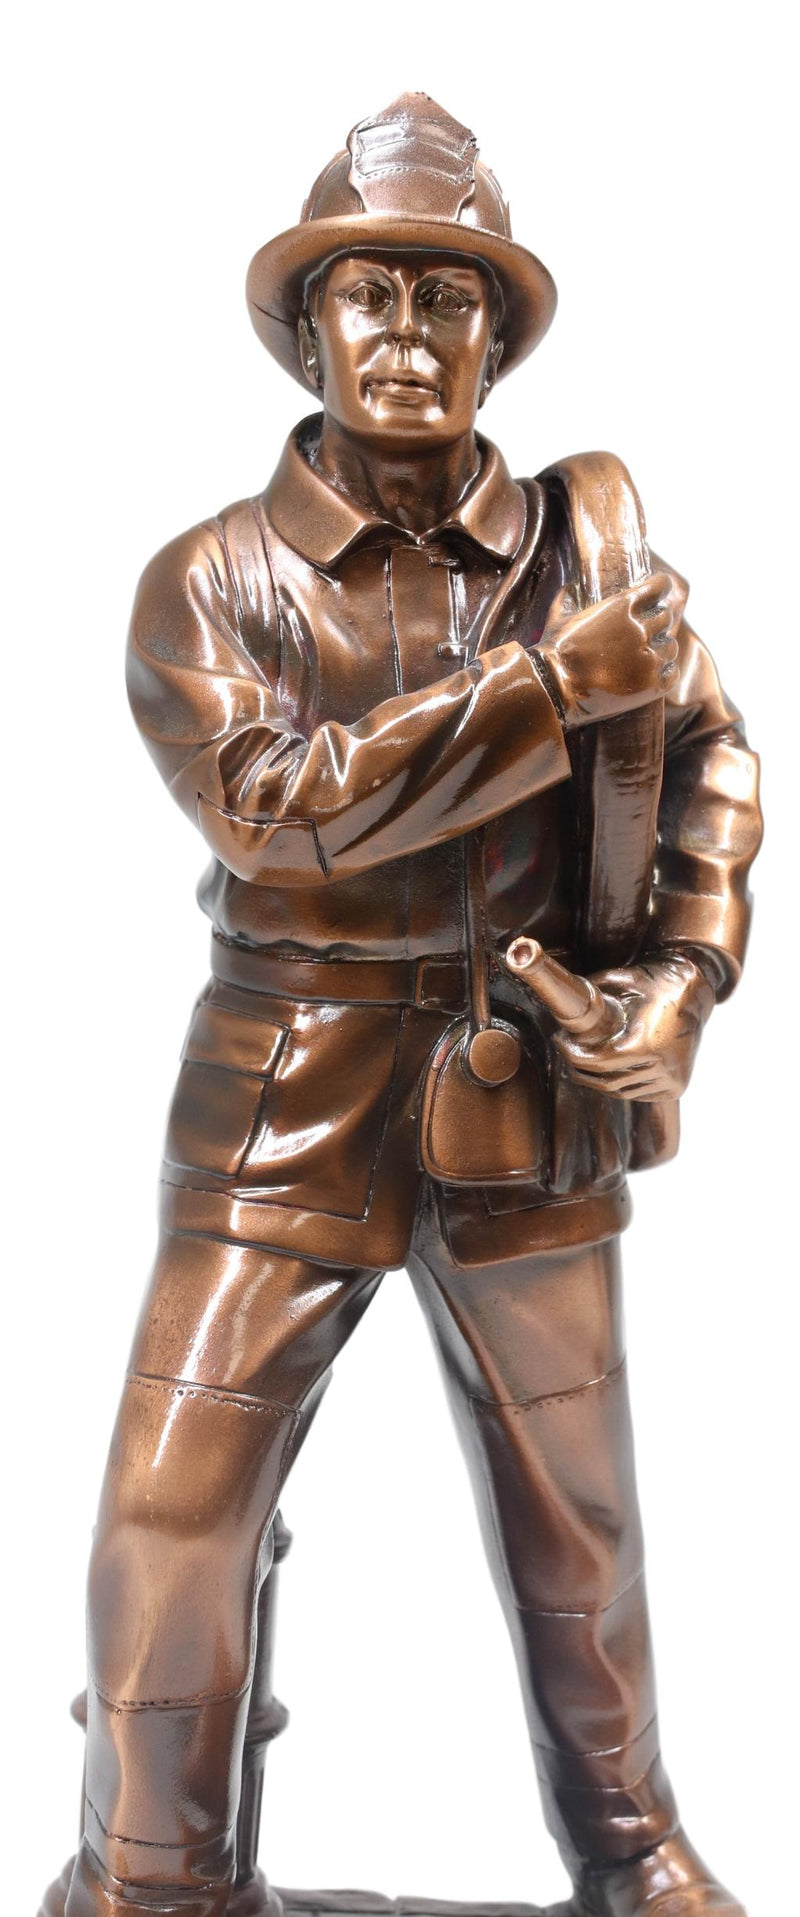 In Line Of Duty Fireman Carrying Hose By Hydrant Statue 12"H Fire Fighter Decor